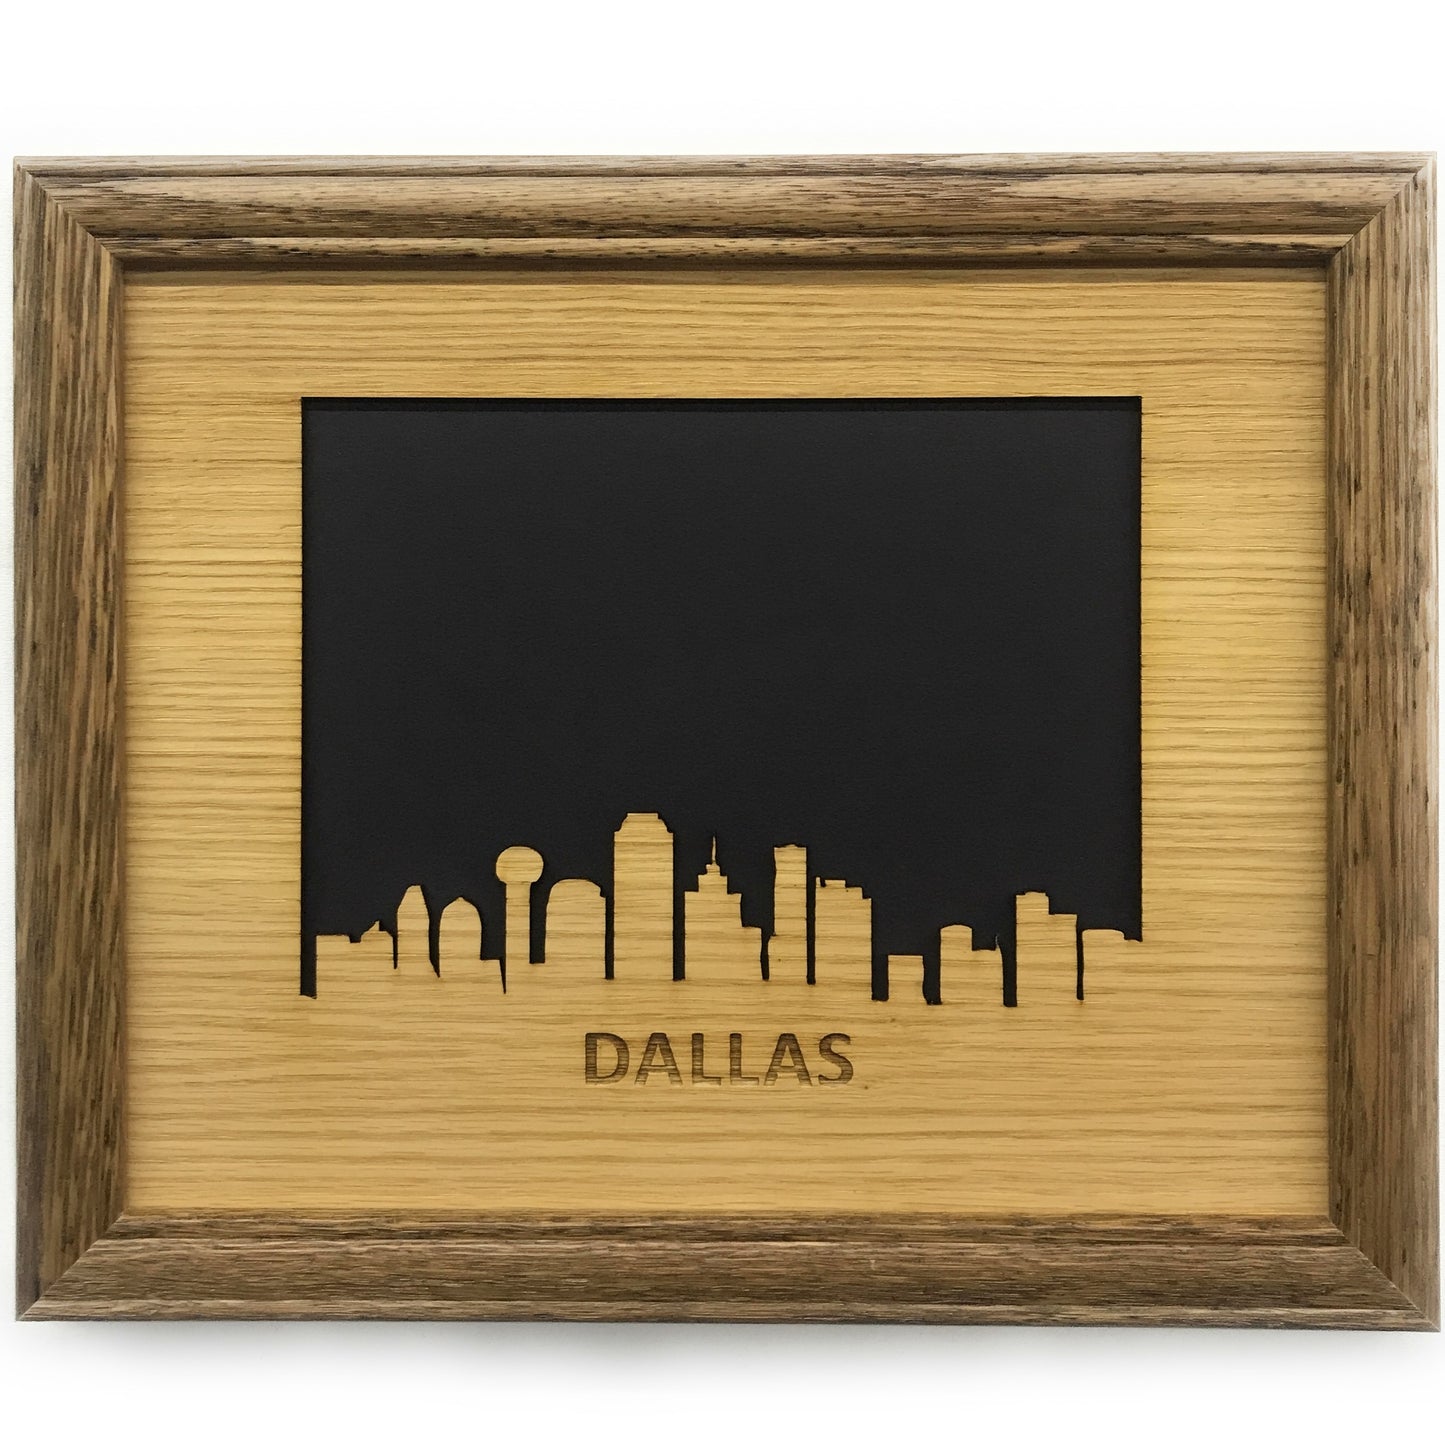 Dallas Picture Frame - 8x10 Frame Hold 5x7 Photo